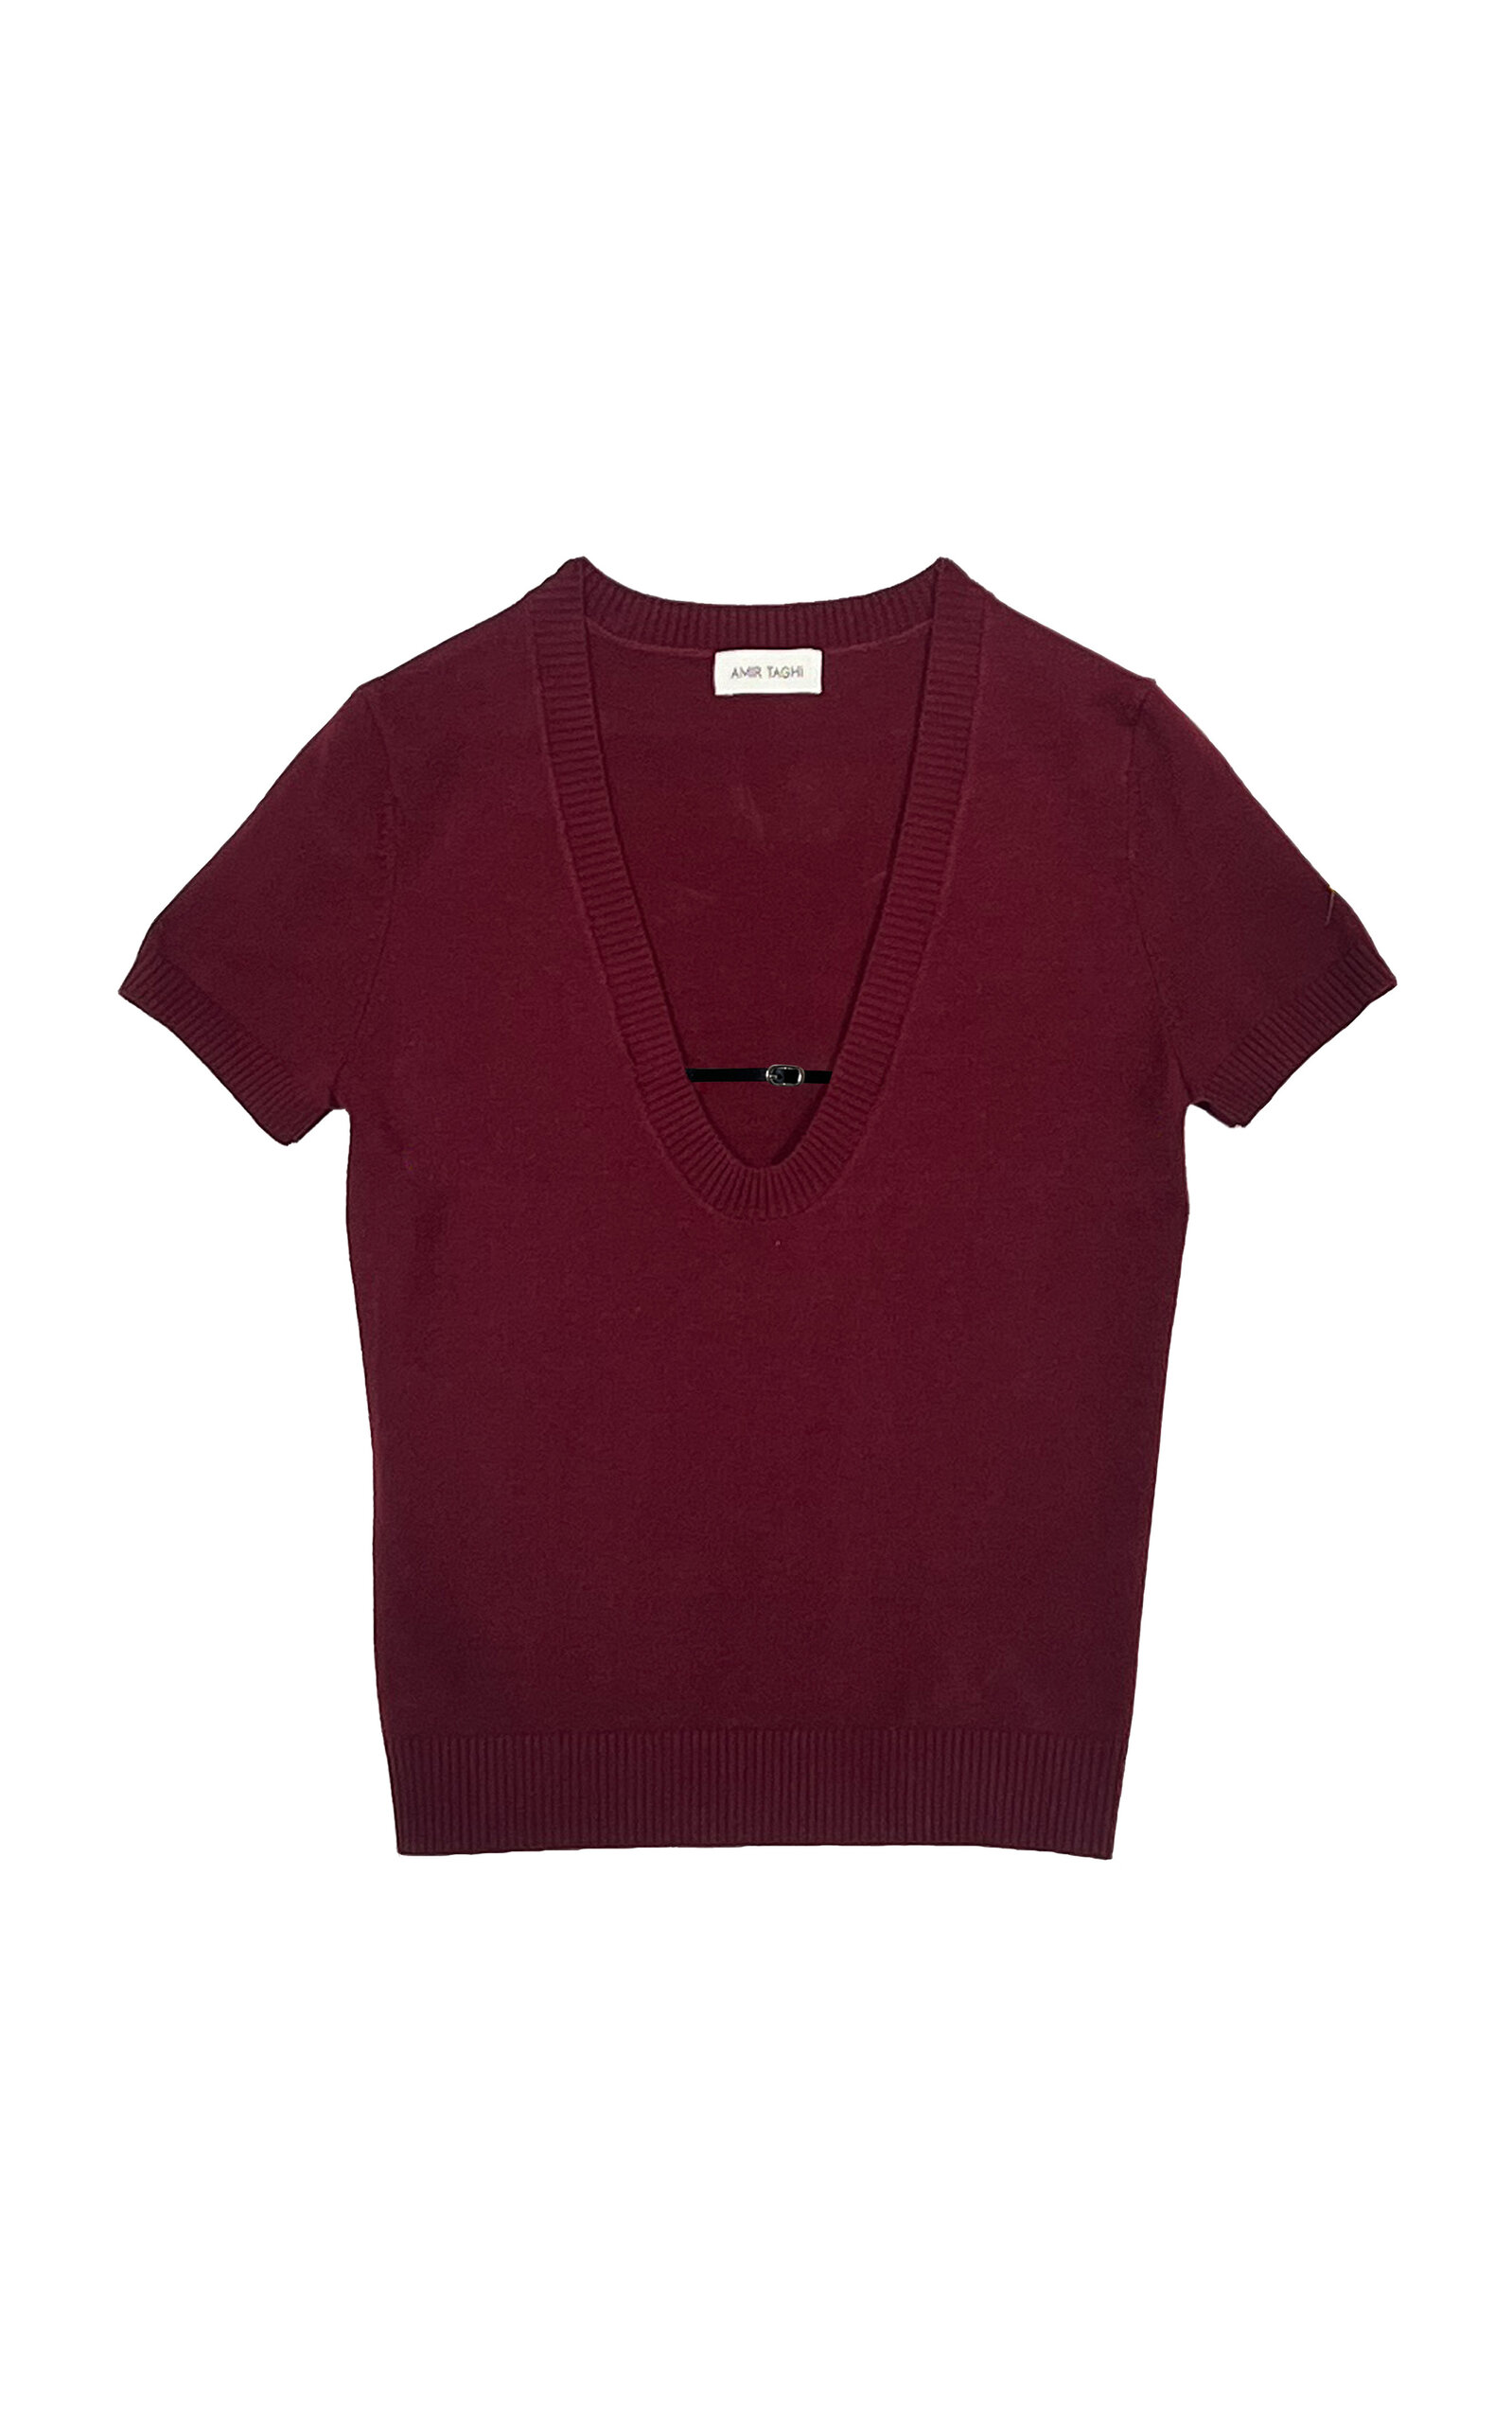 Meredith Buckle-Detailed Knit Top